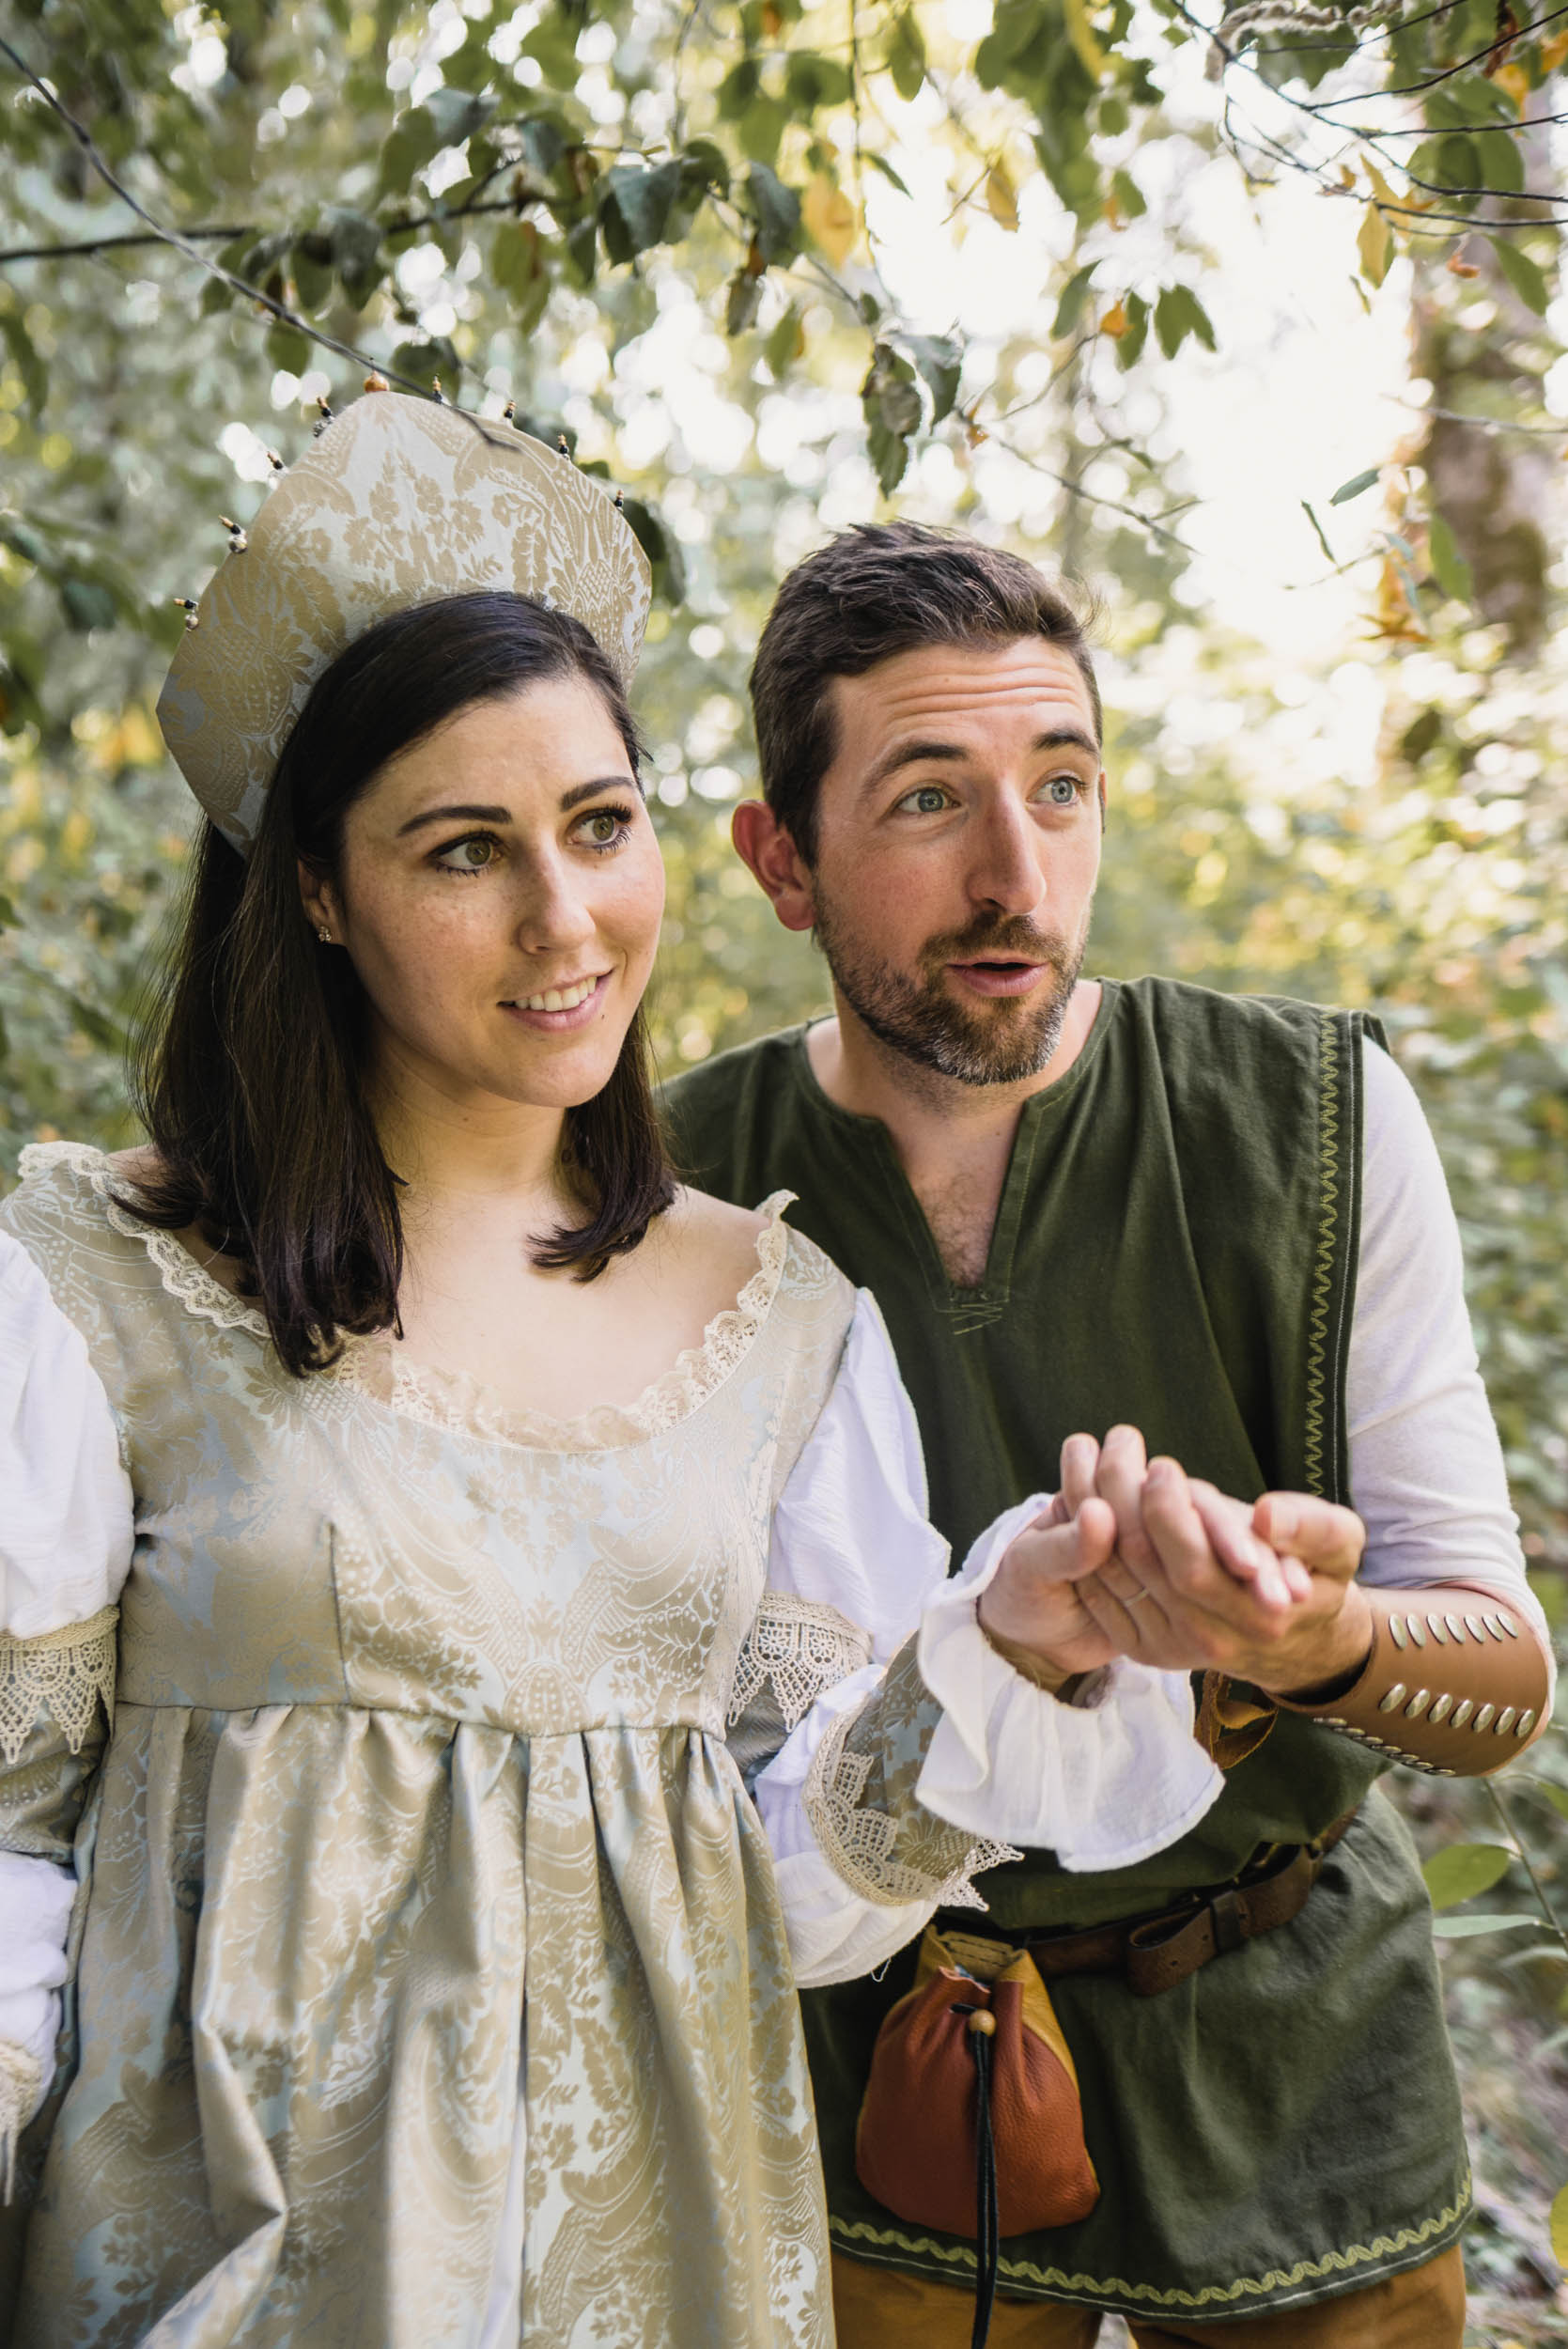 Couple with medieval costumes in forest